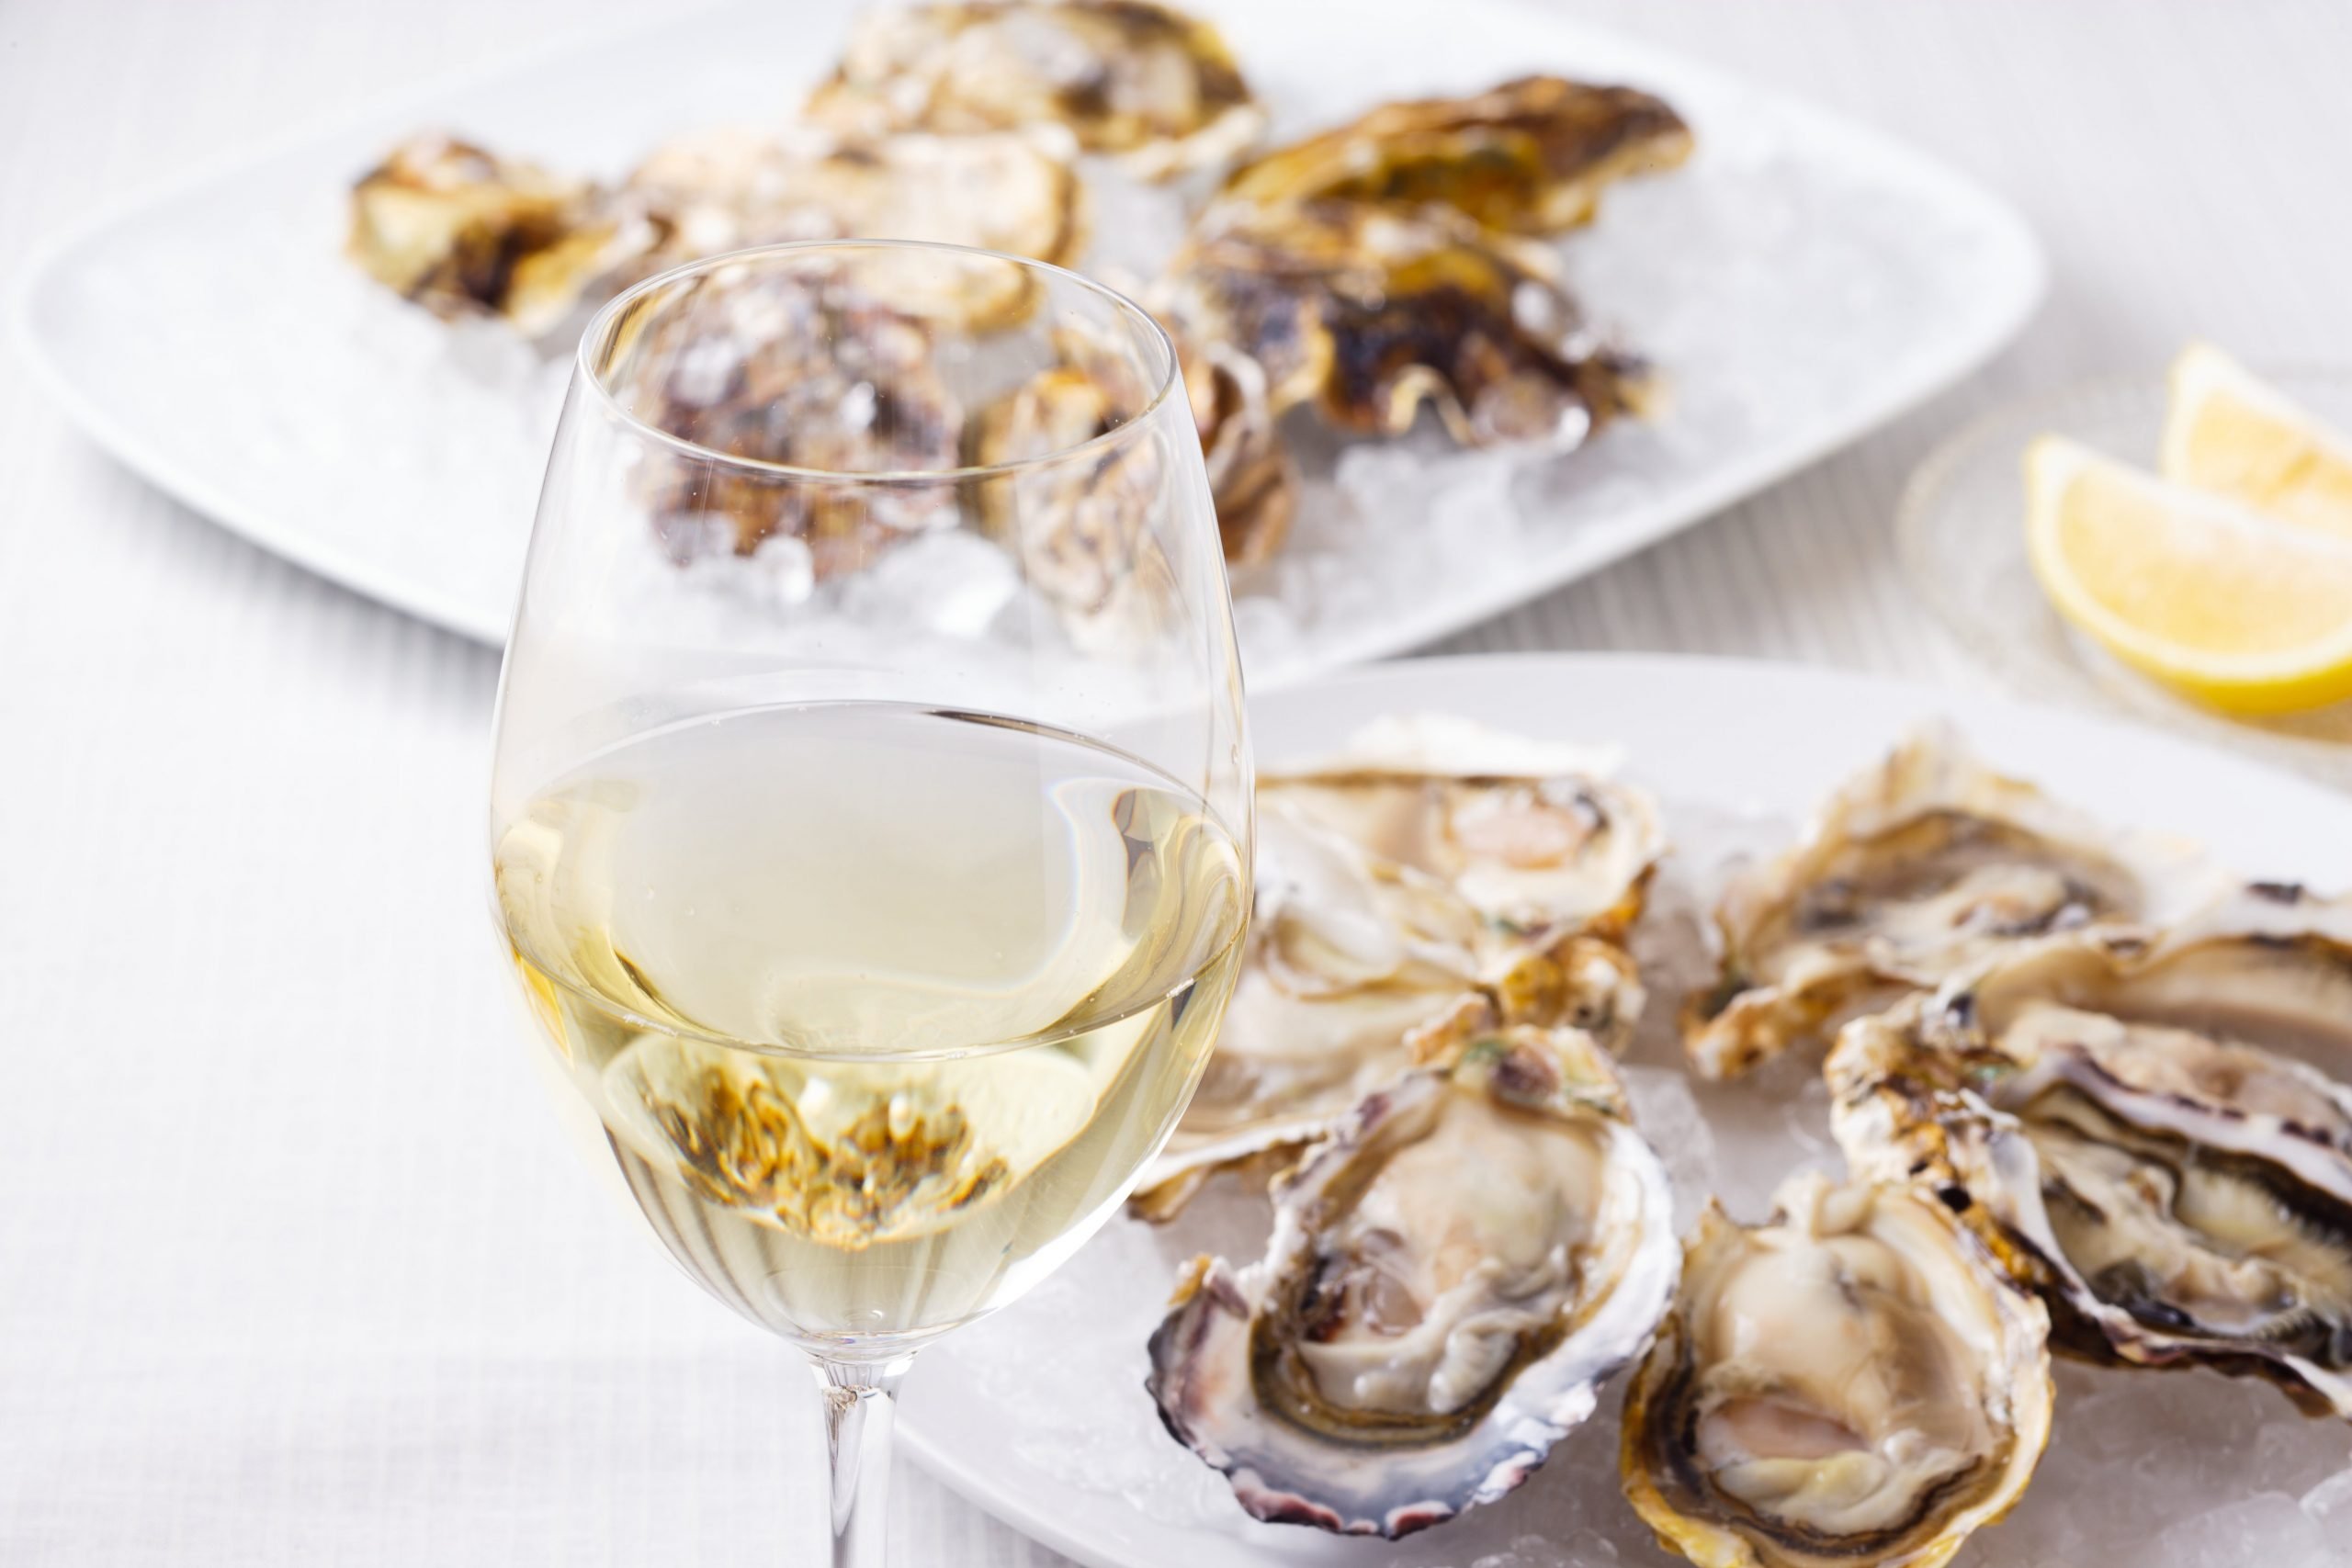 Pair Seafood and Wine like a Pro!